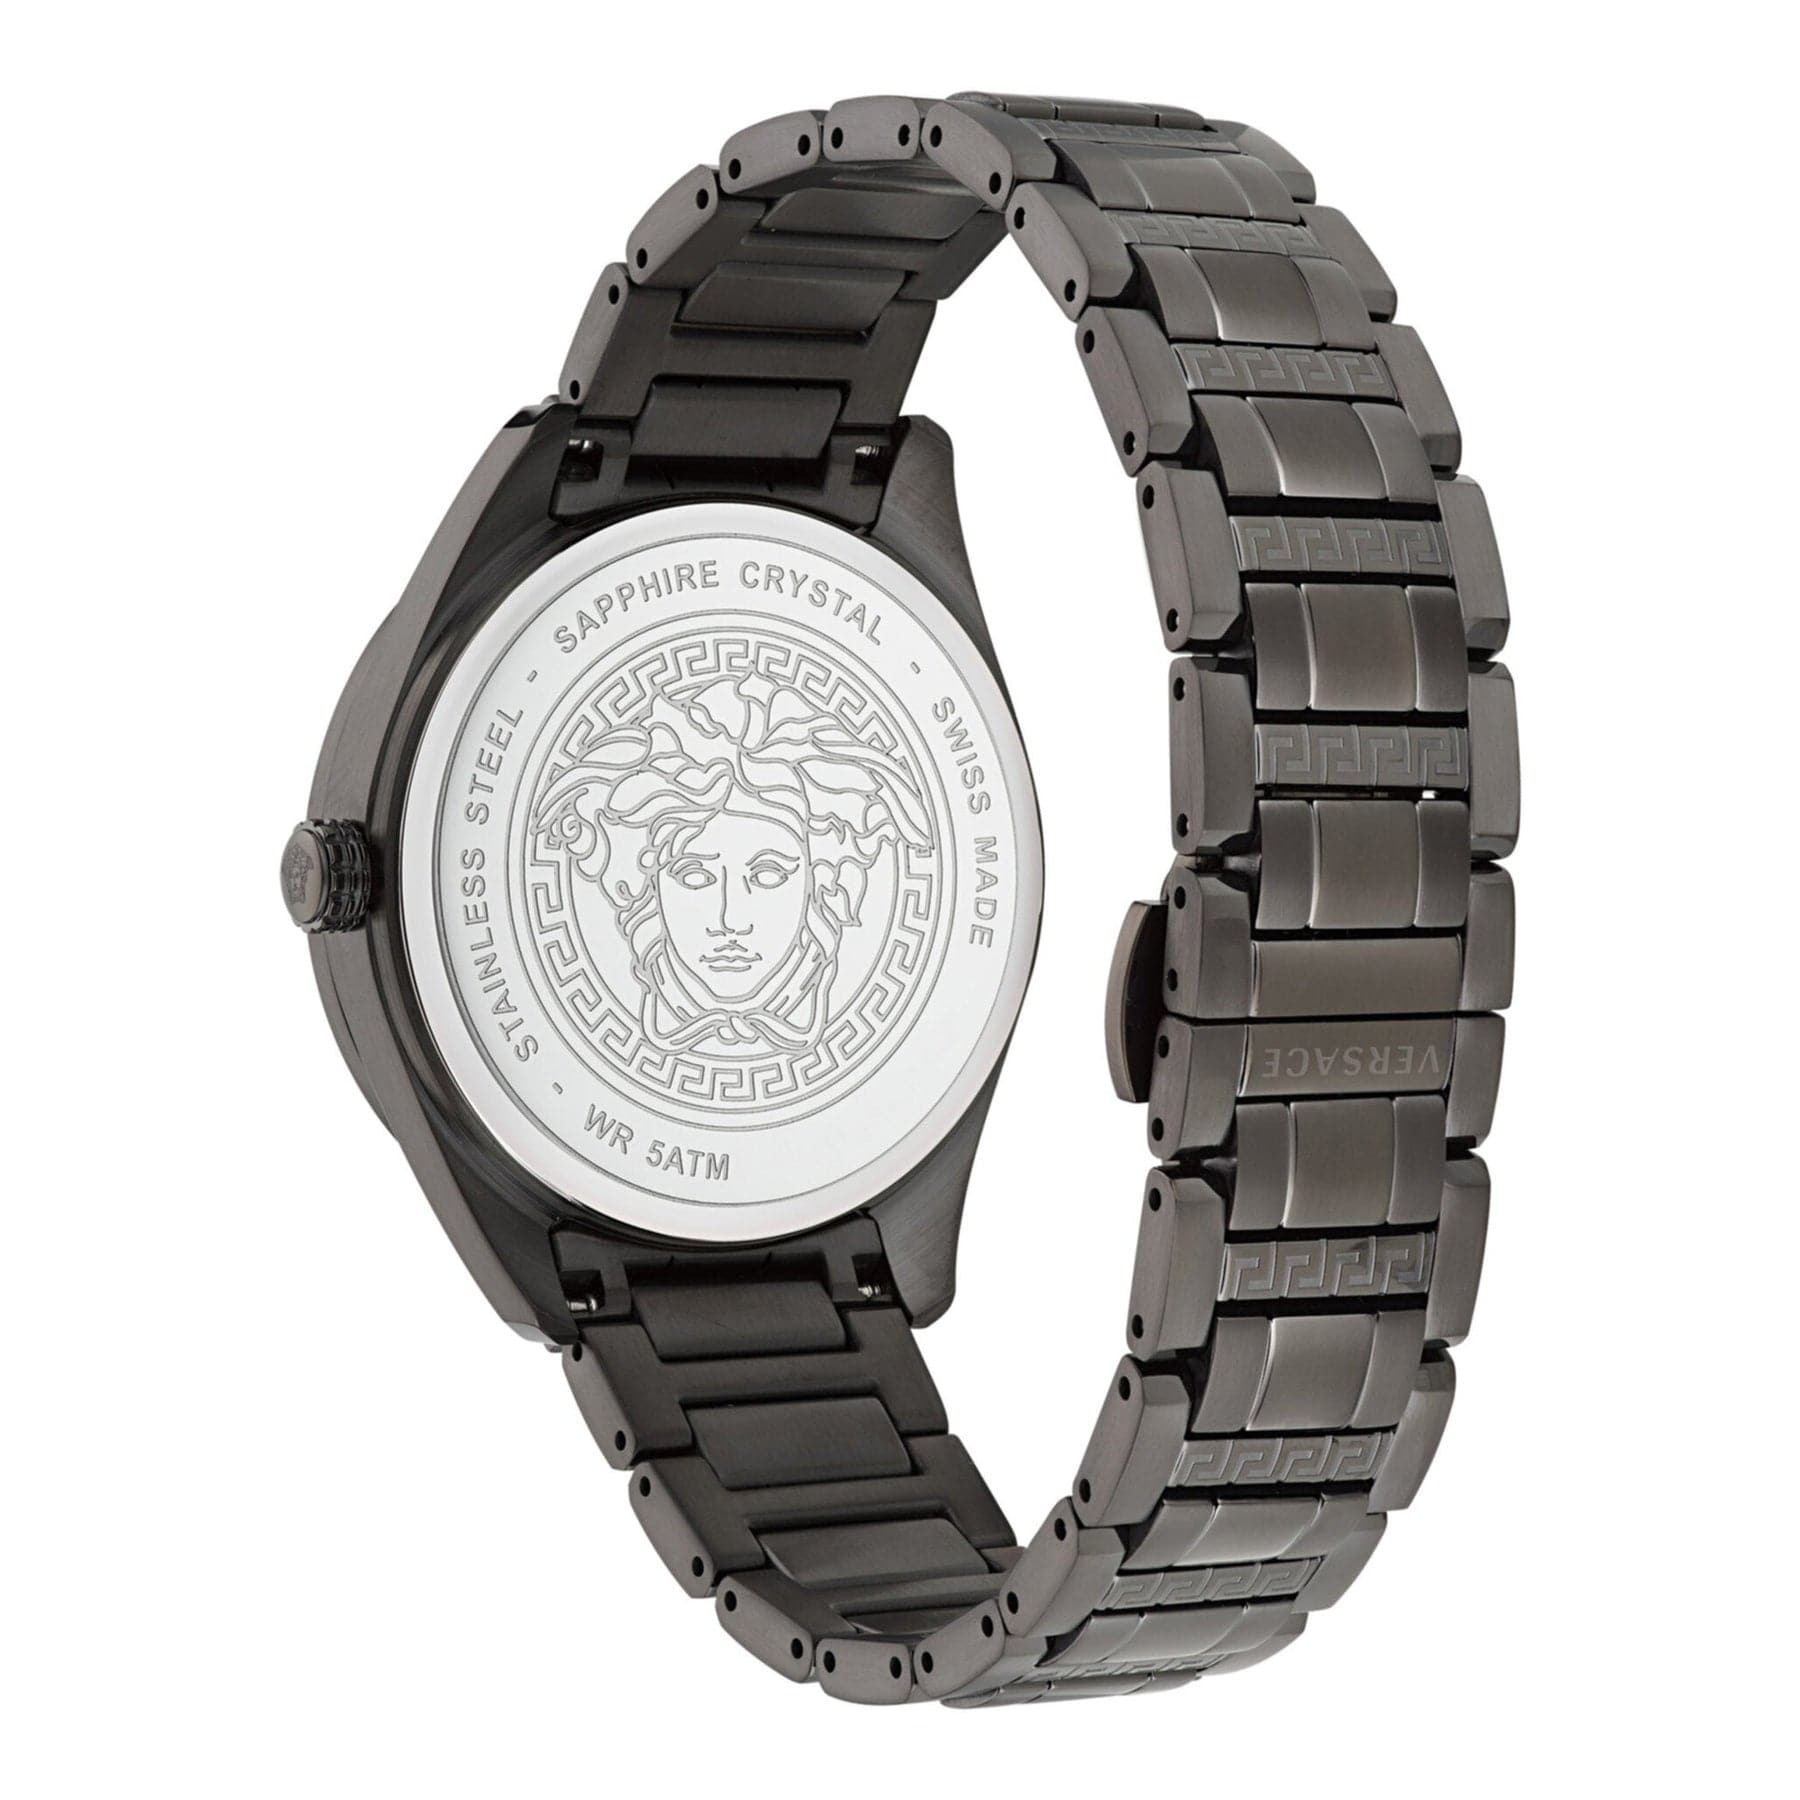 Joker  Witch Ash Black Mens Watch Bracelet Stack Buy Joker  Witch Ash  Black Mens Watch Bracelet Stack Online at Best Price in India  Nykaa